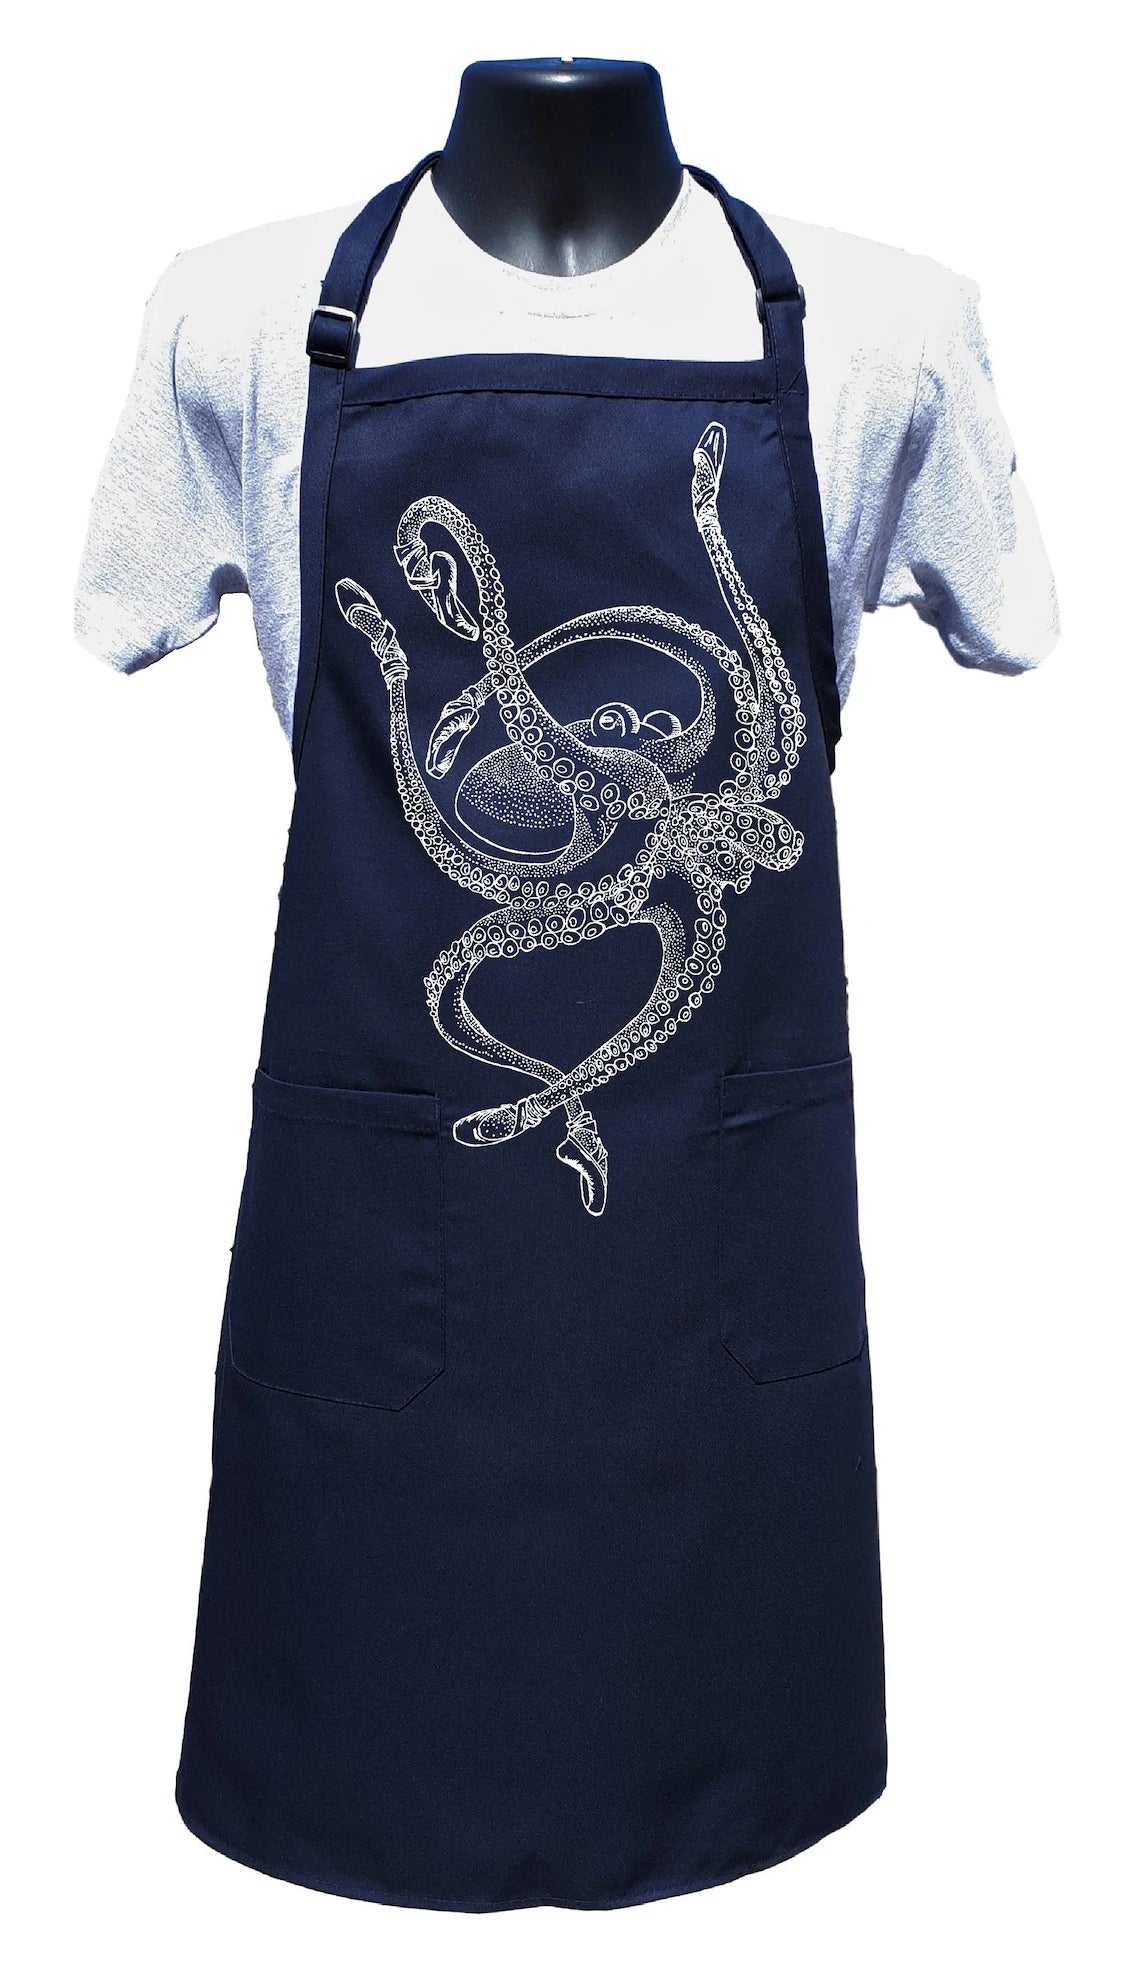 Octopus Ballet Dancer Chef's Apron with Pockets